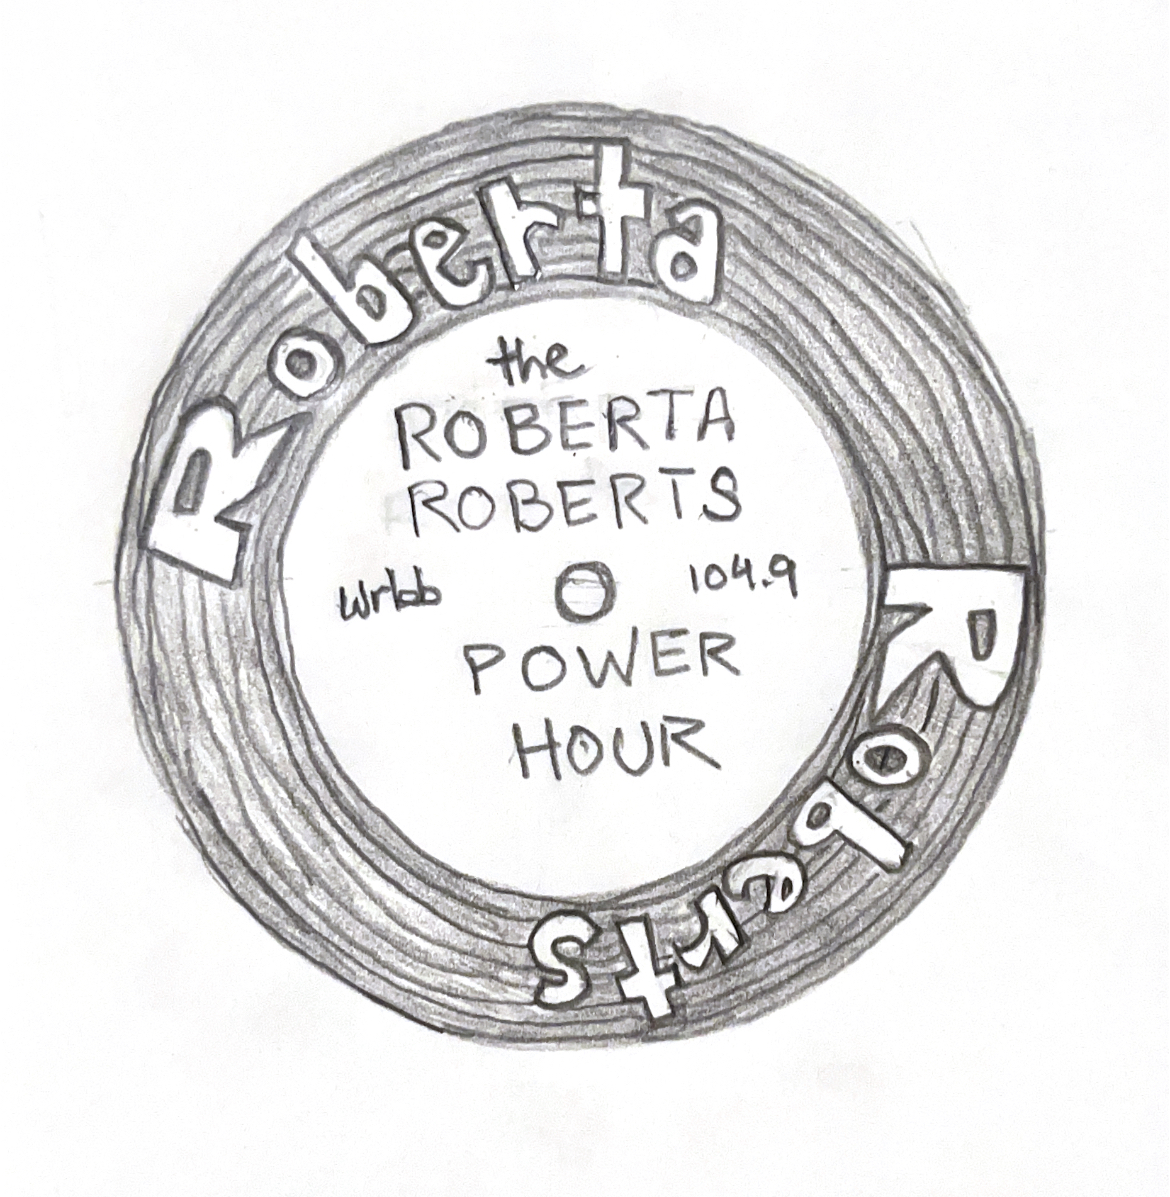 The Roberta Roberts Power Hour cover